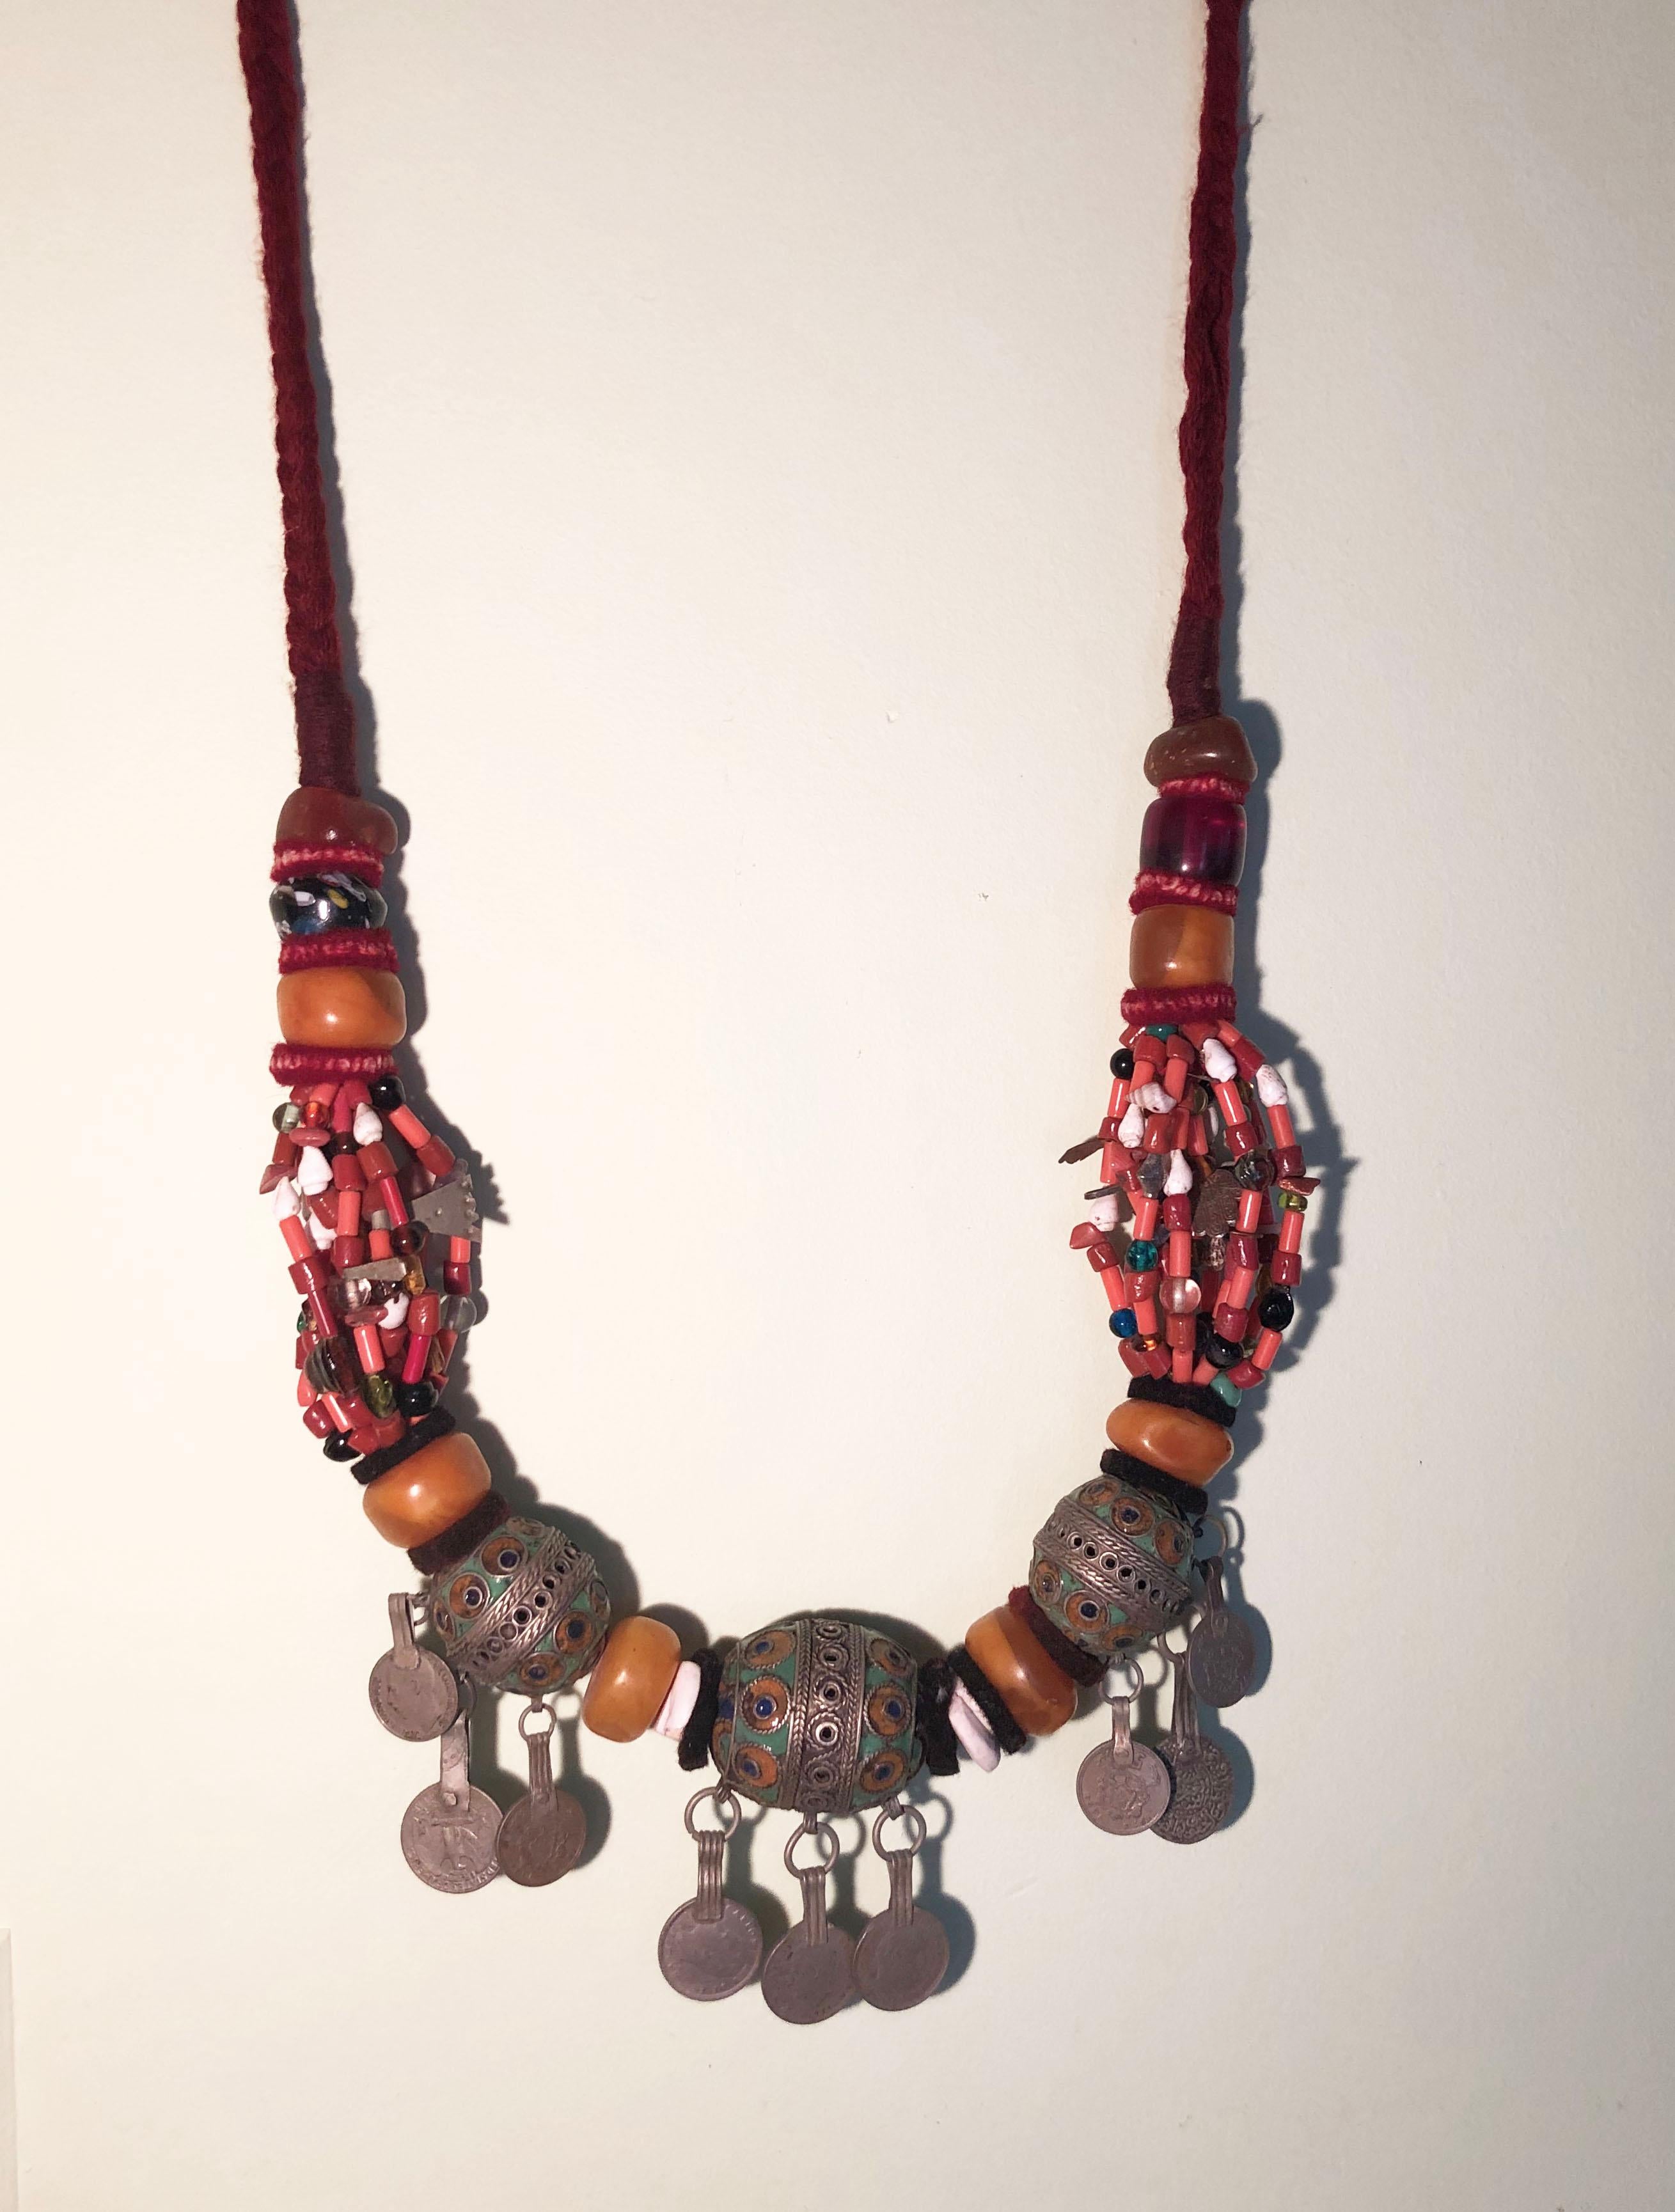 Handmade artisan pendant necklace from Morocco. Made in the southern desert town of Zagora, this necklace has many precious beads including coral, glass, amber copal resin, shells, onyx, and more. Numerous silver charms & hamsa hand of fatima good